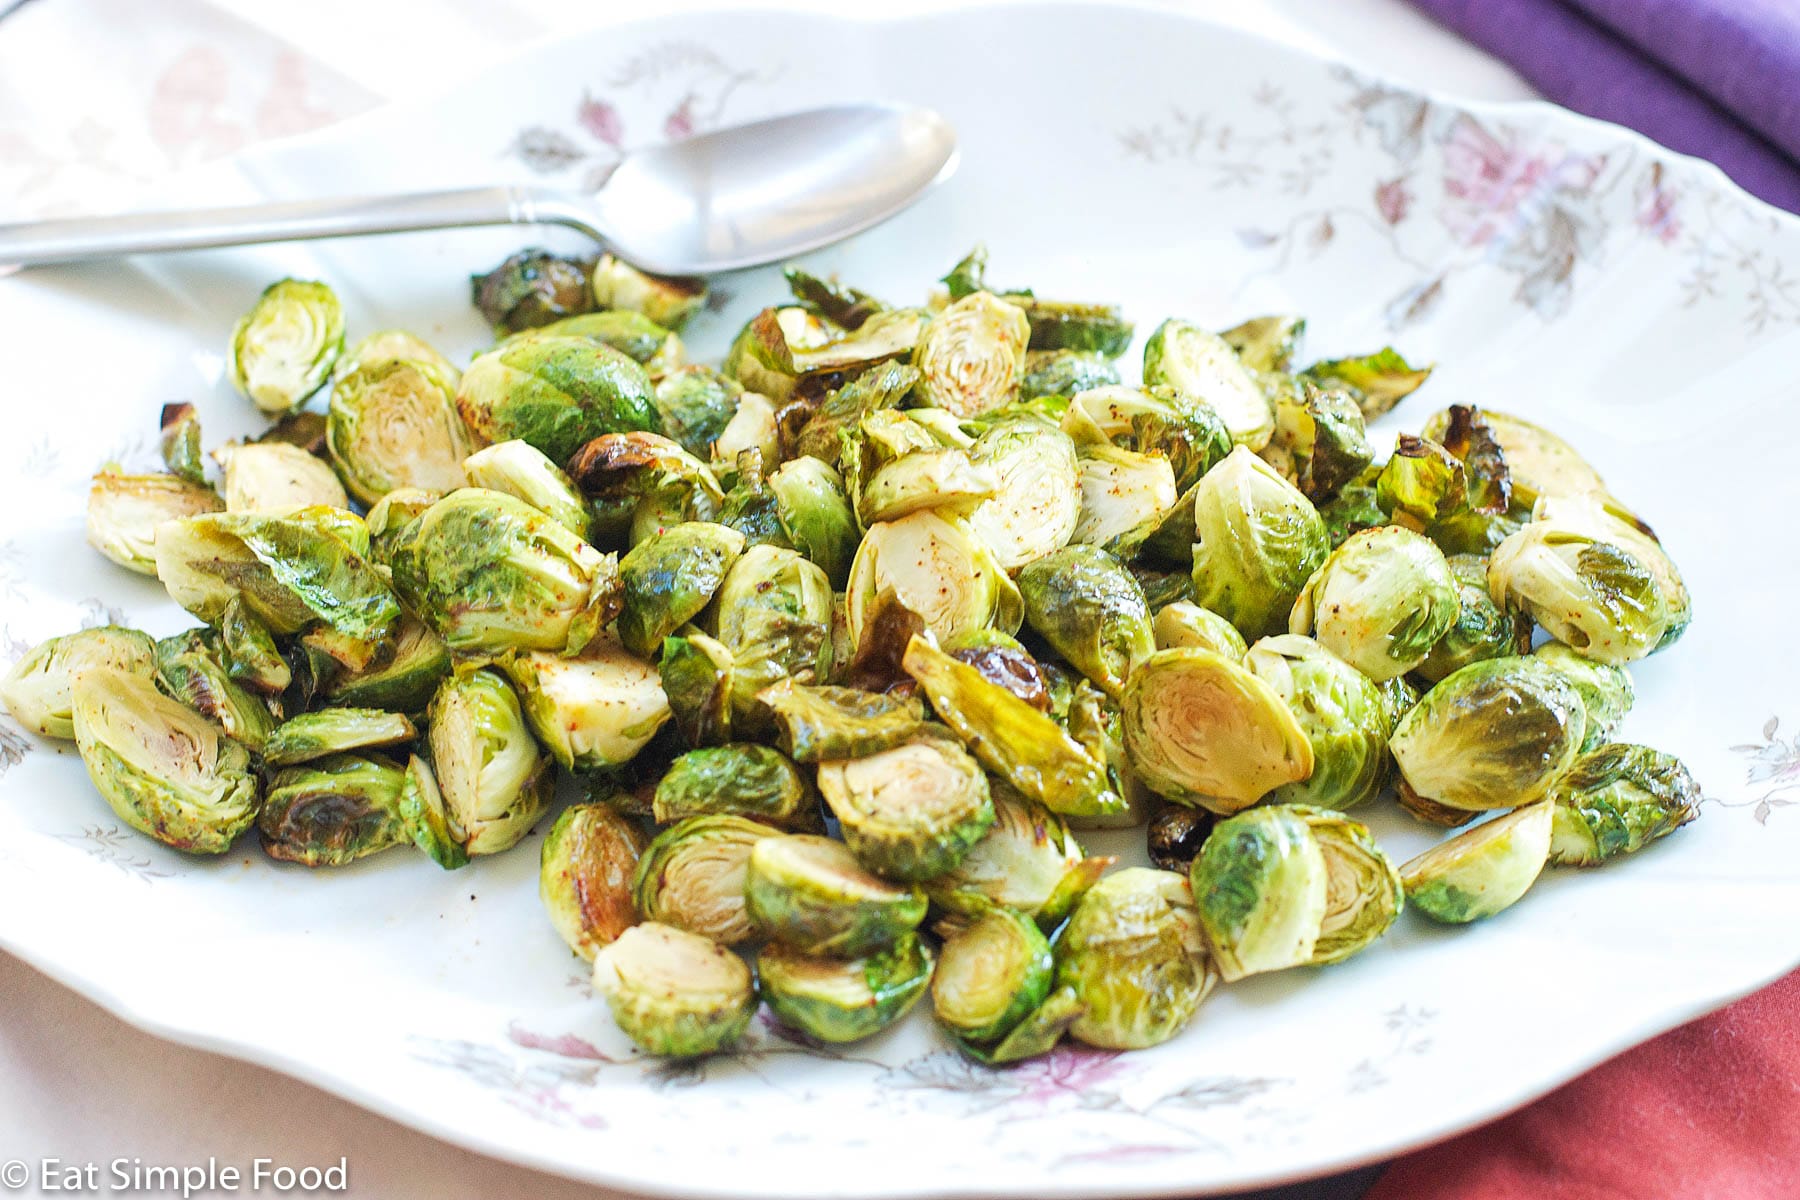 Brown Roasted Brussels Sprouts, cut in half, and on a white plate with pink roses on the edge and a silver spoon.